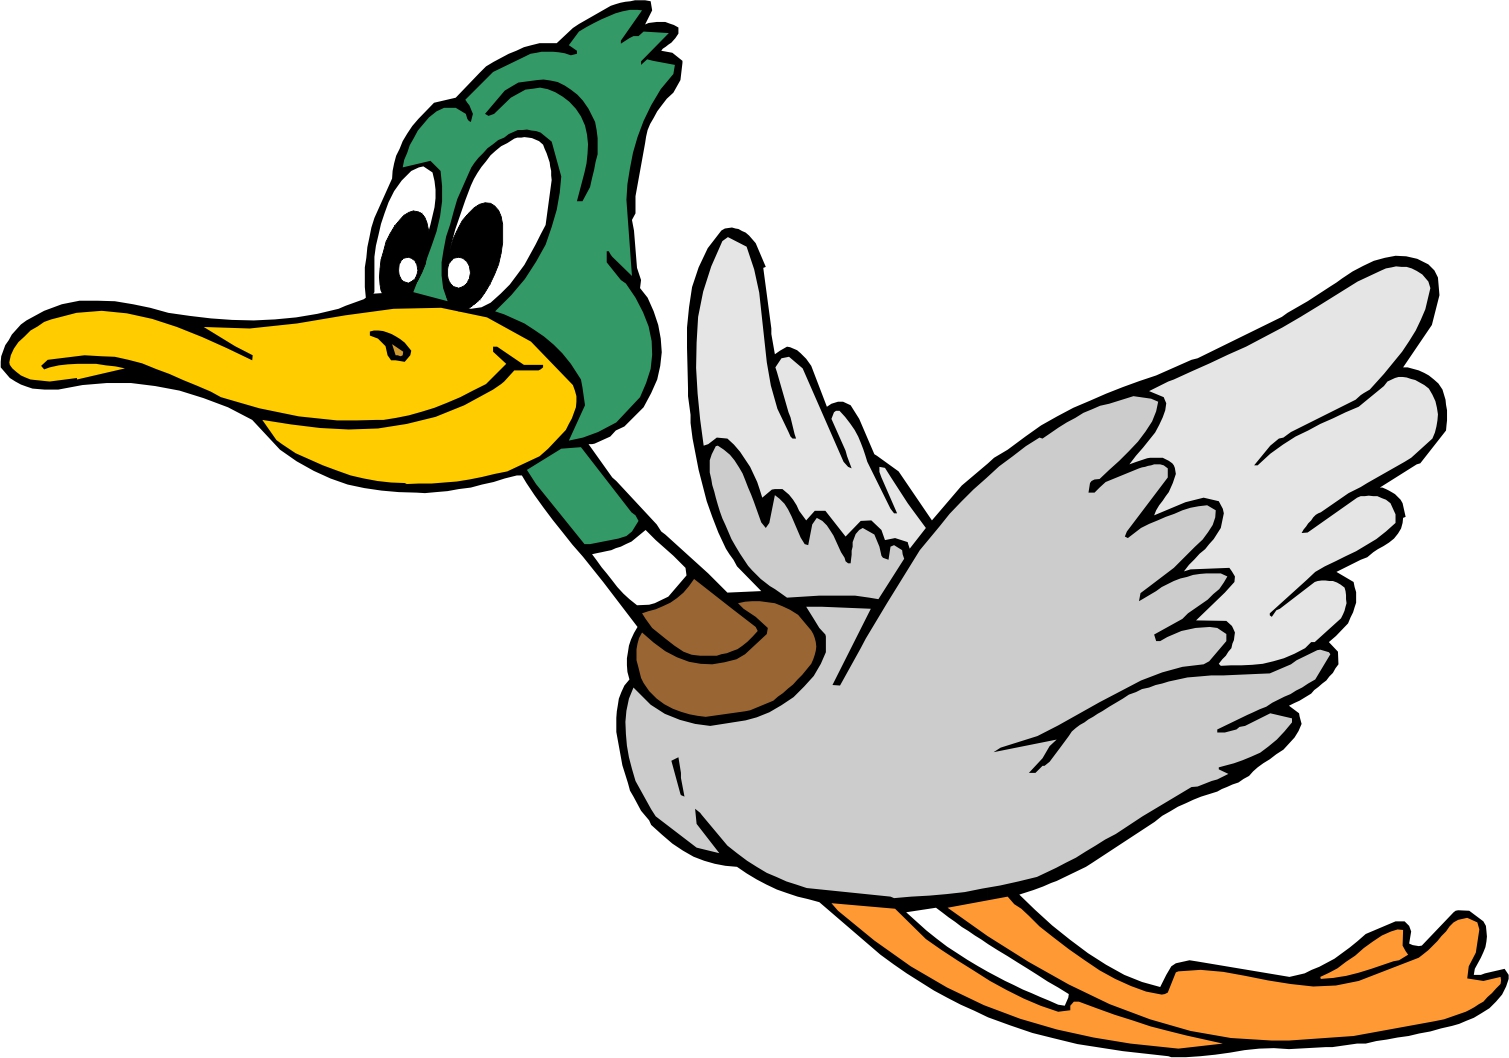 Flying duck clipart free clipart images image 3